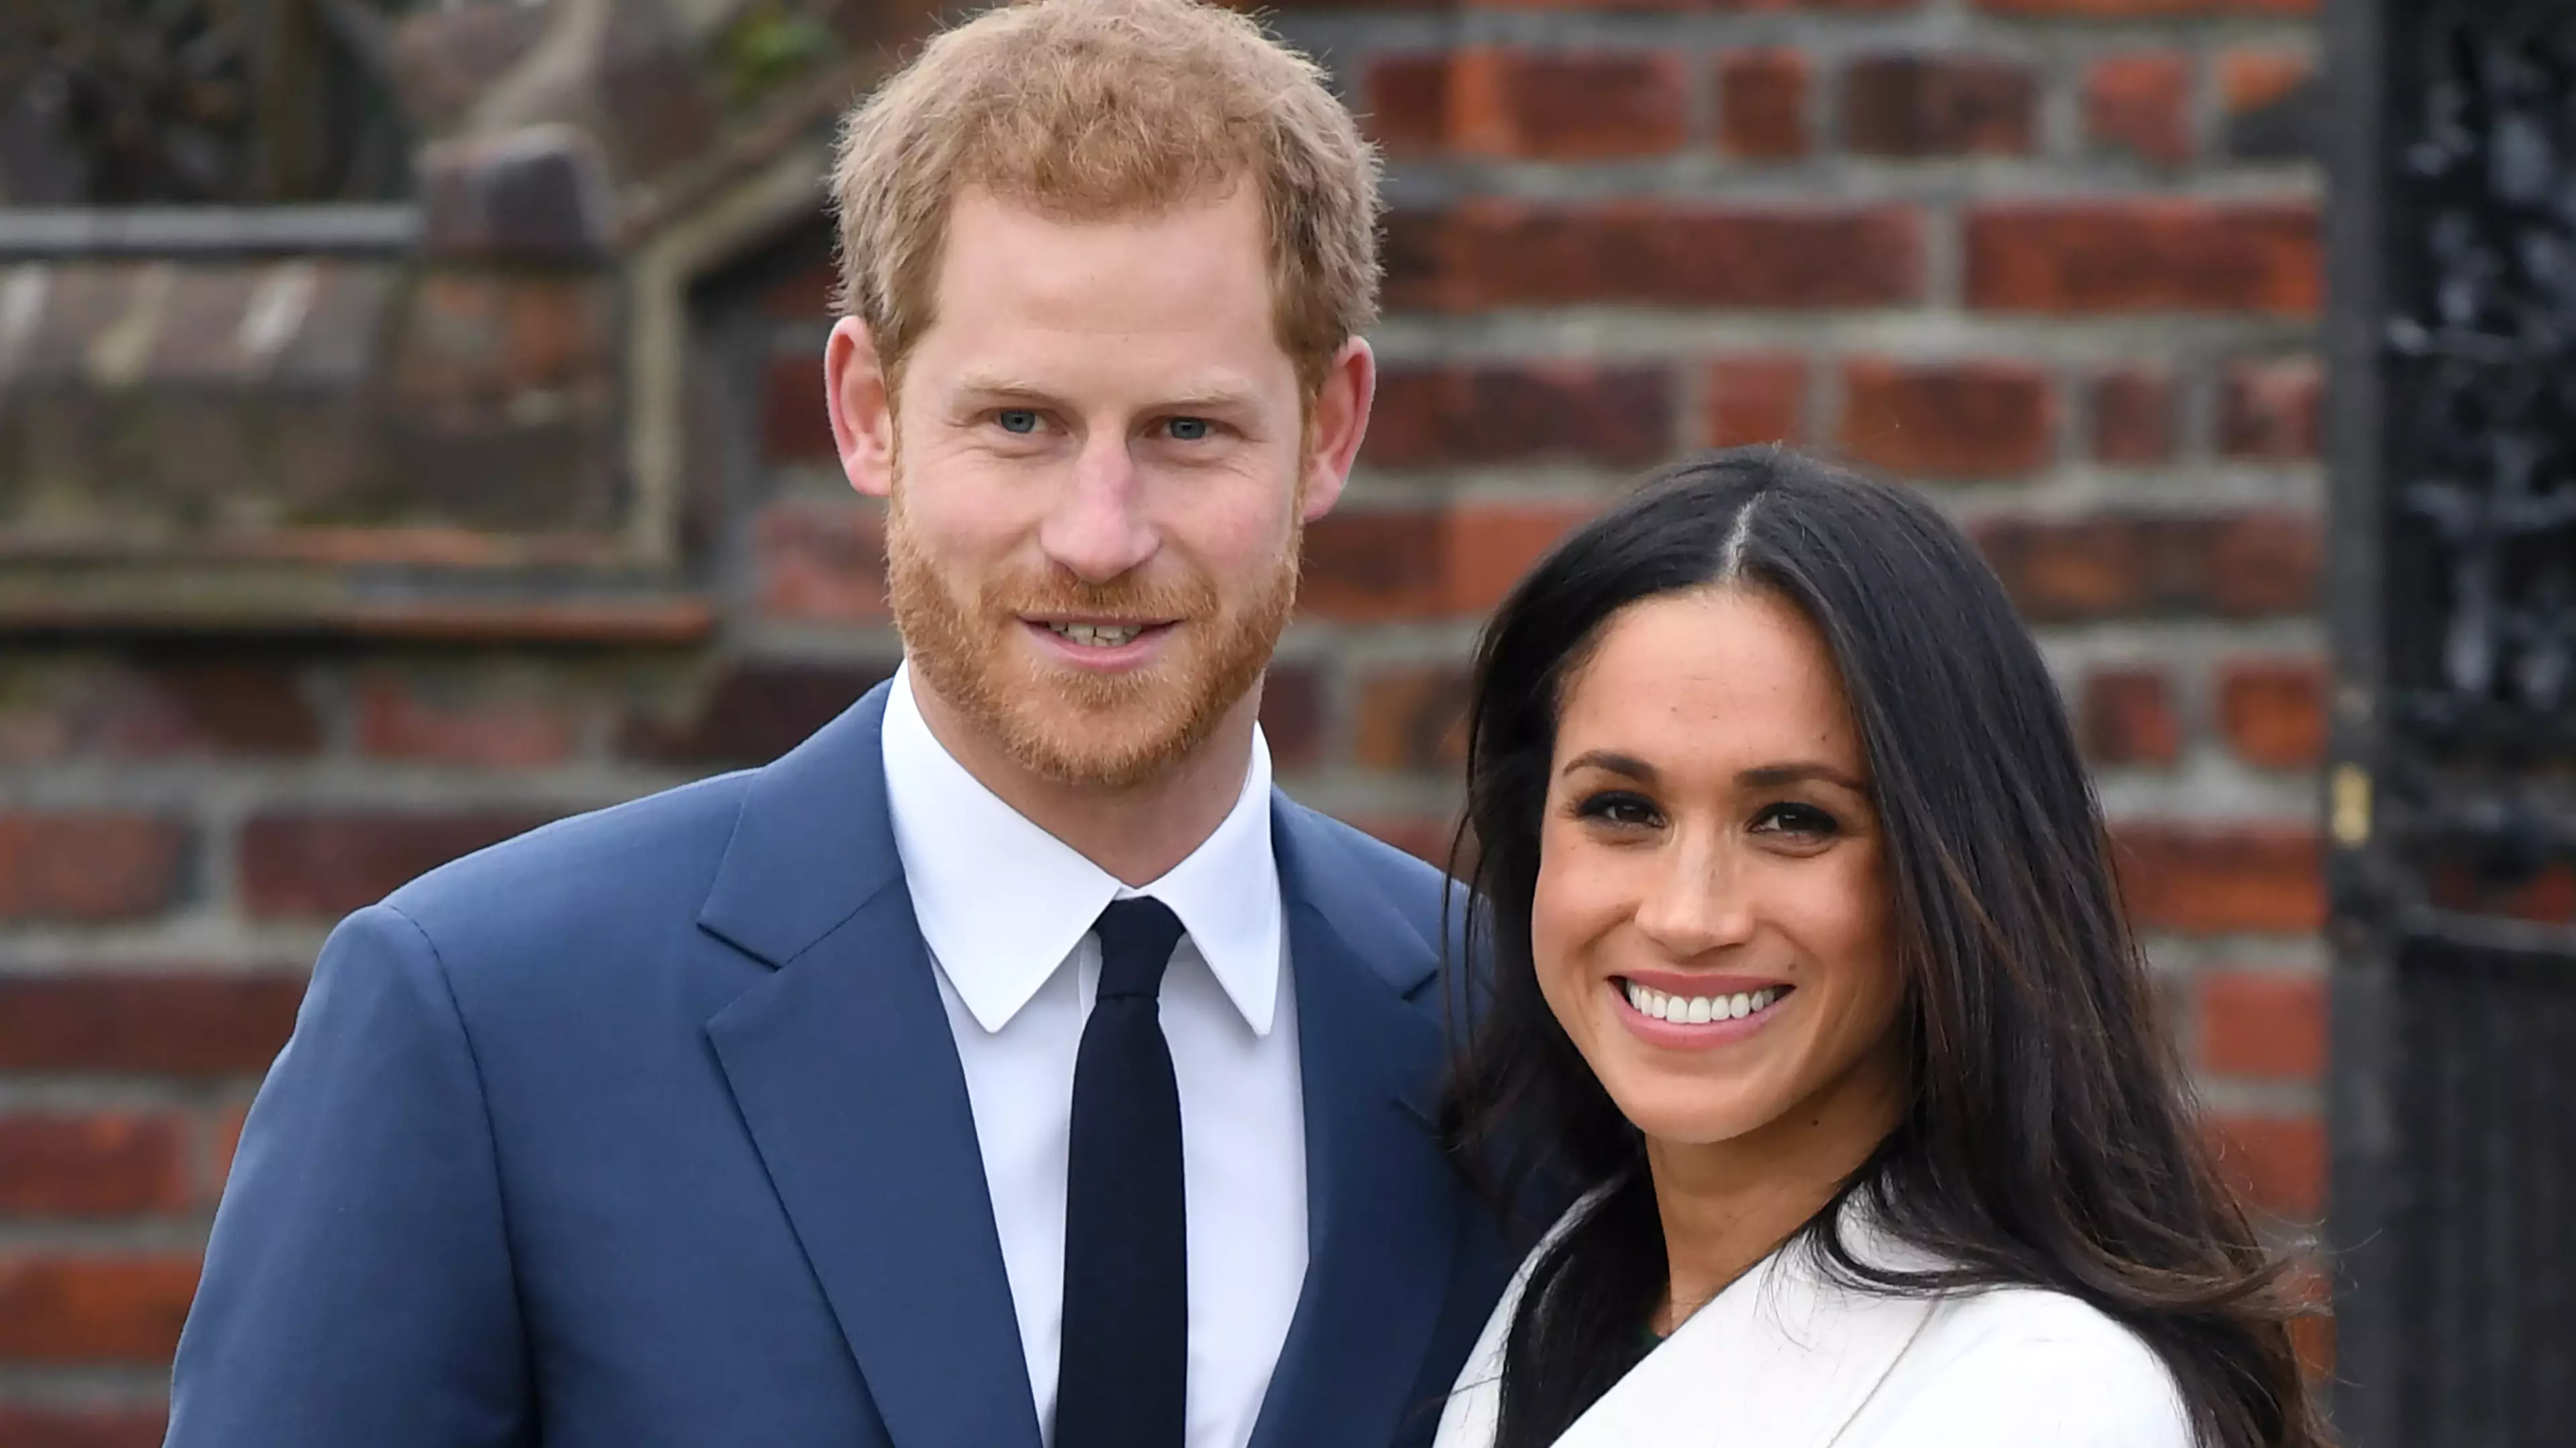 Prince Harry Carpool Karaoke: Harry Says He And Meghan 'Went From Zero To 60 In The First Two Months'